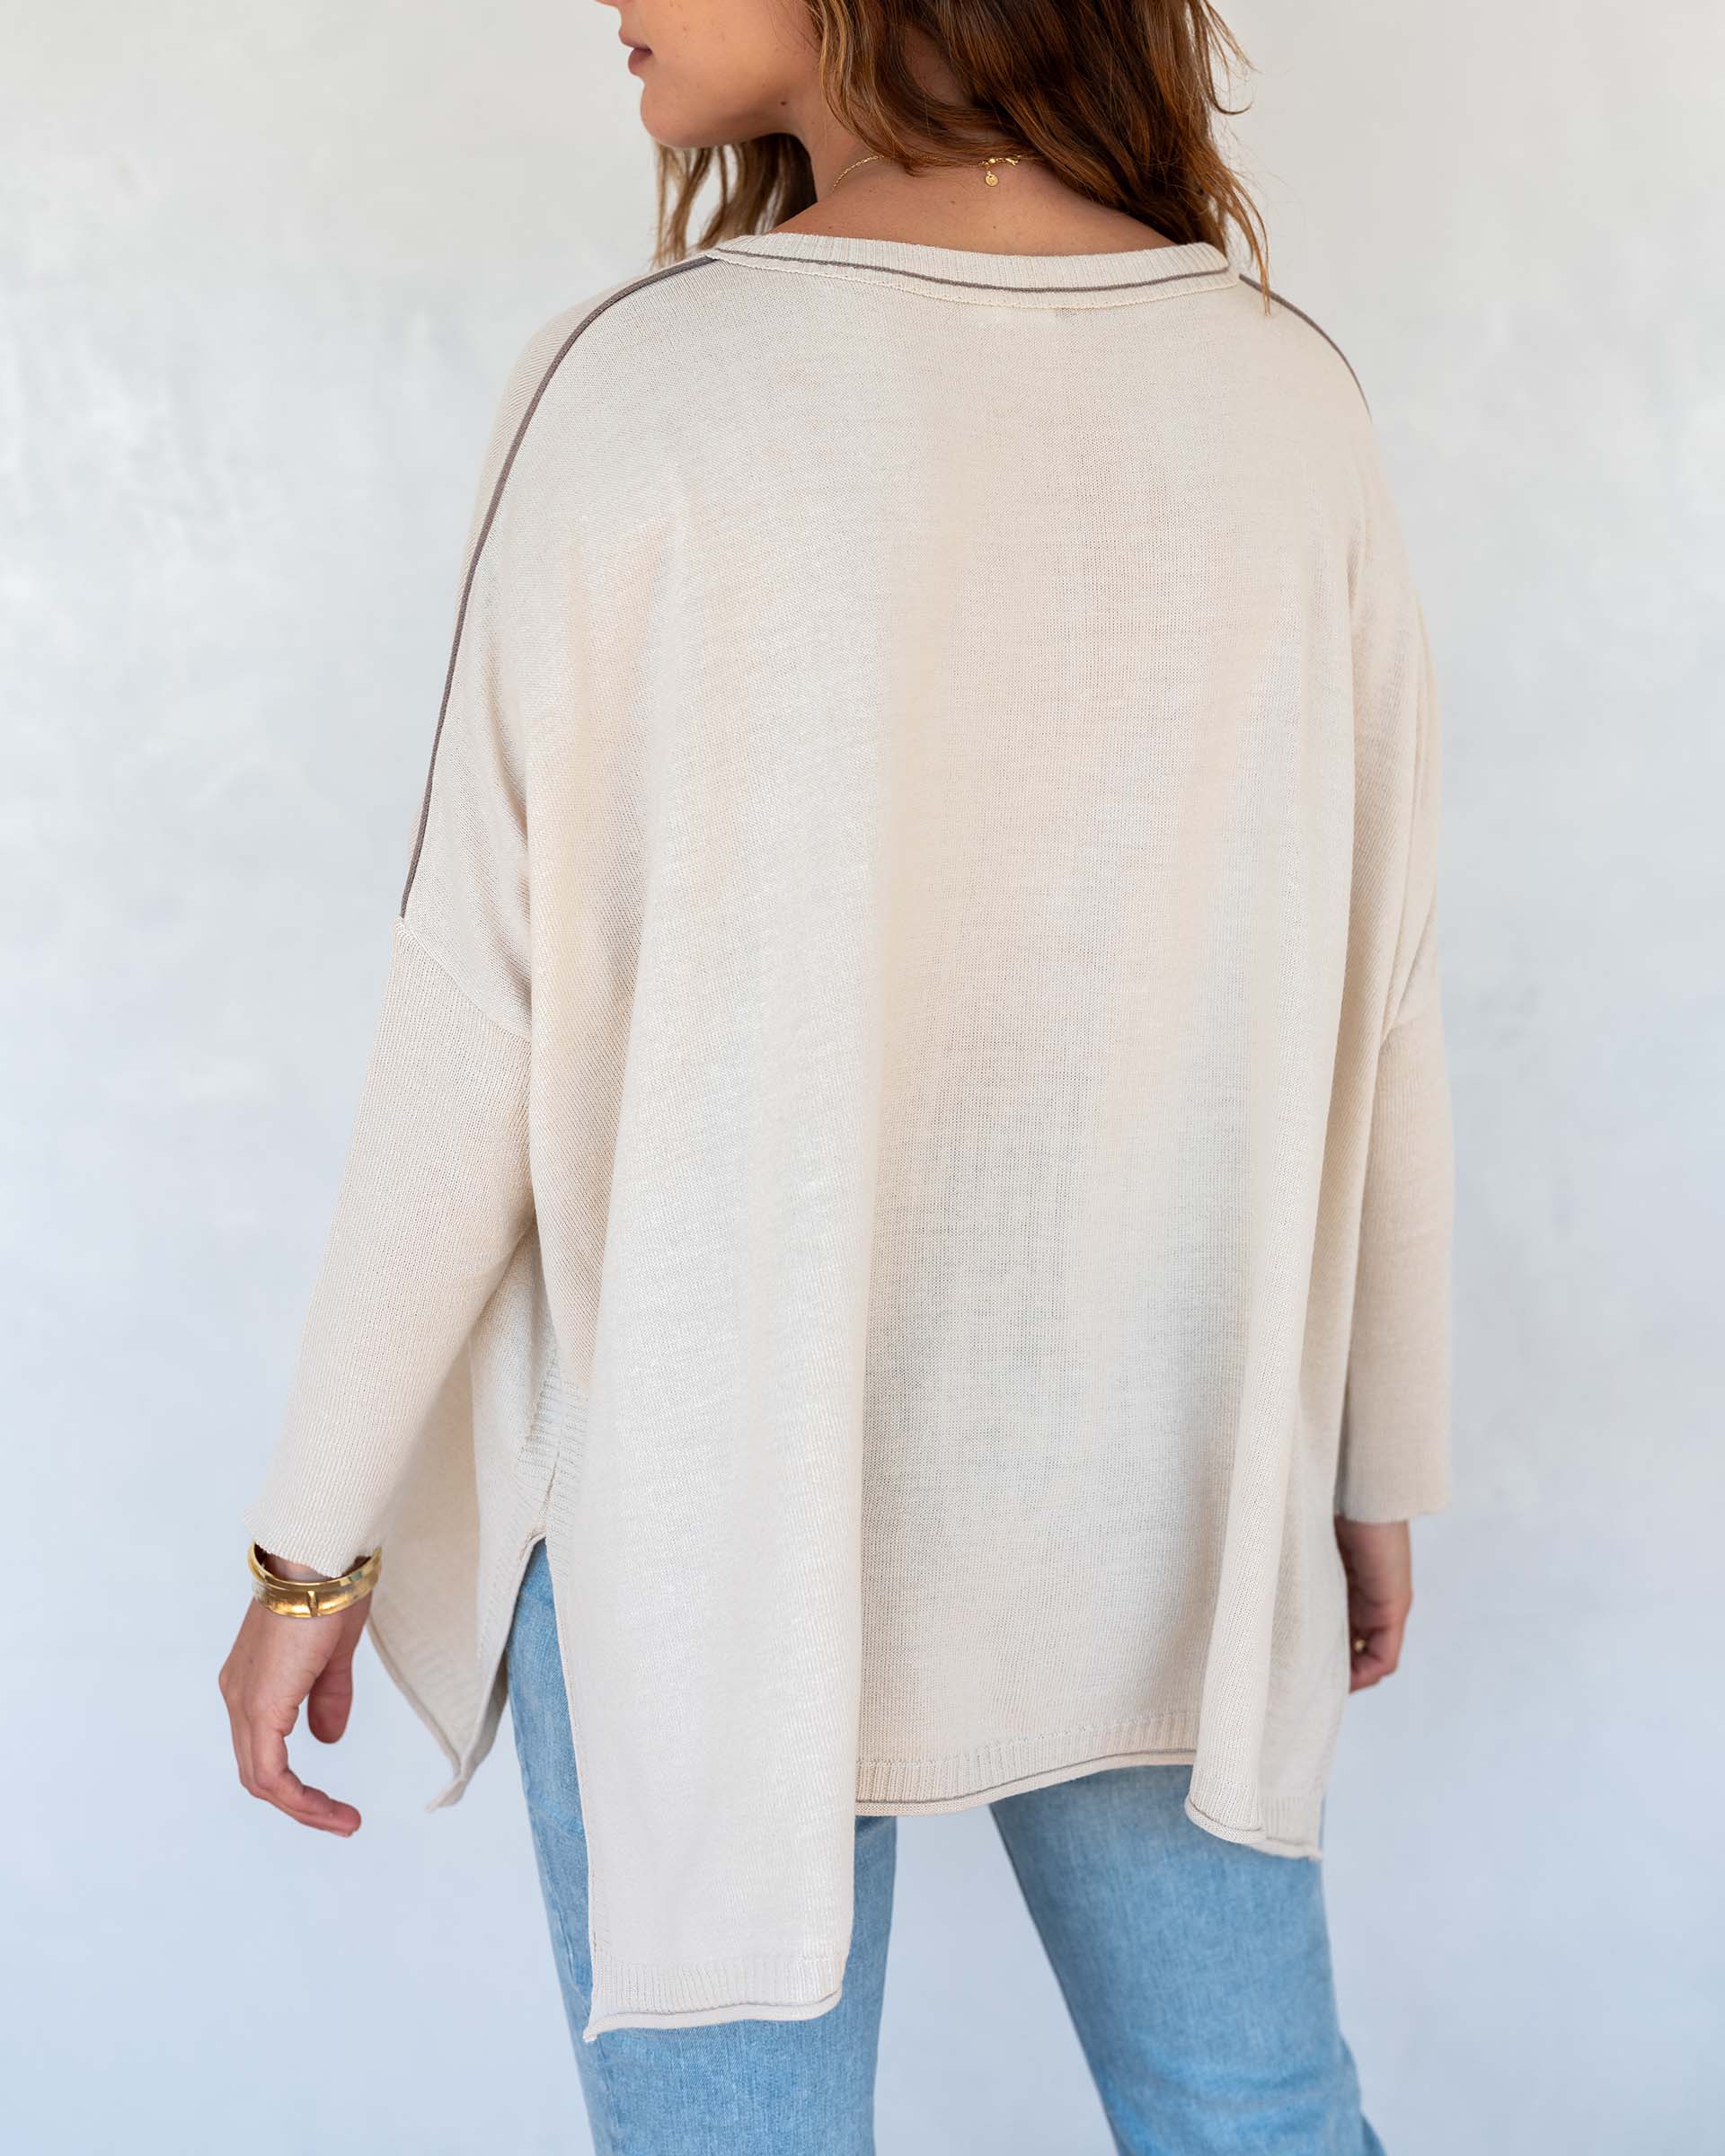 Women's Cream Crewneck Sweater with Brown Contrast Oversized Rear View